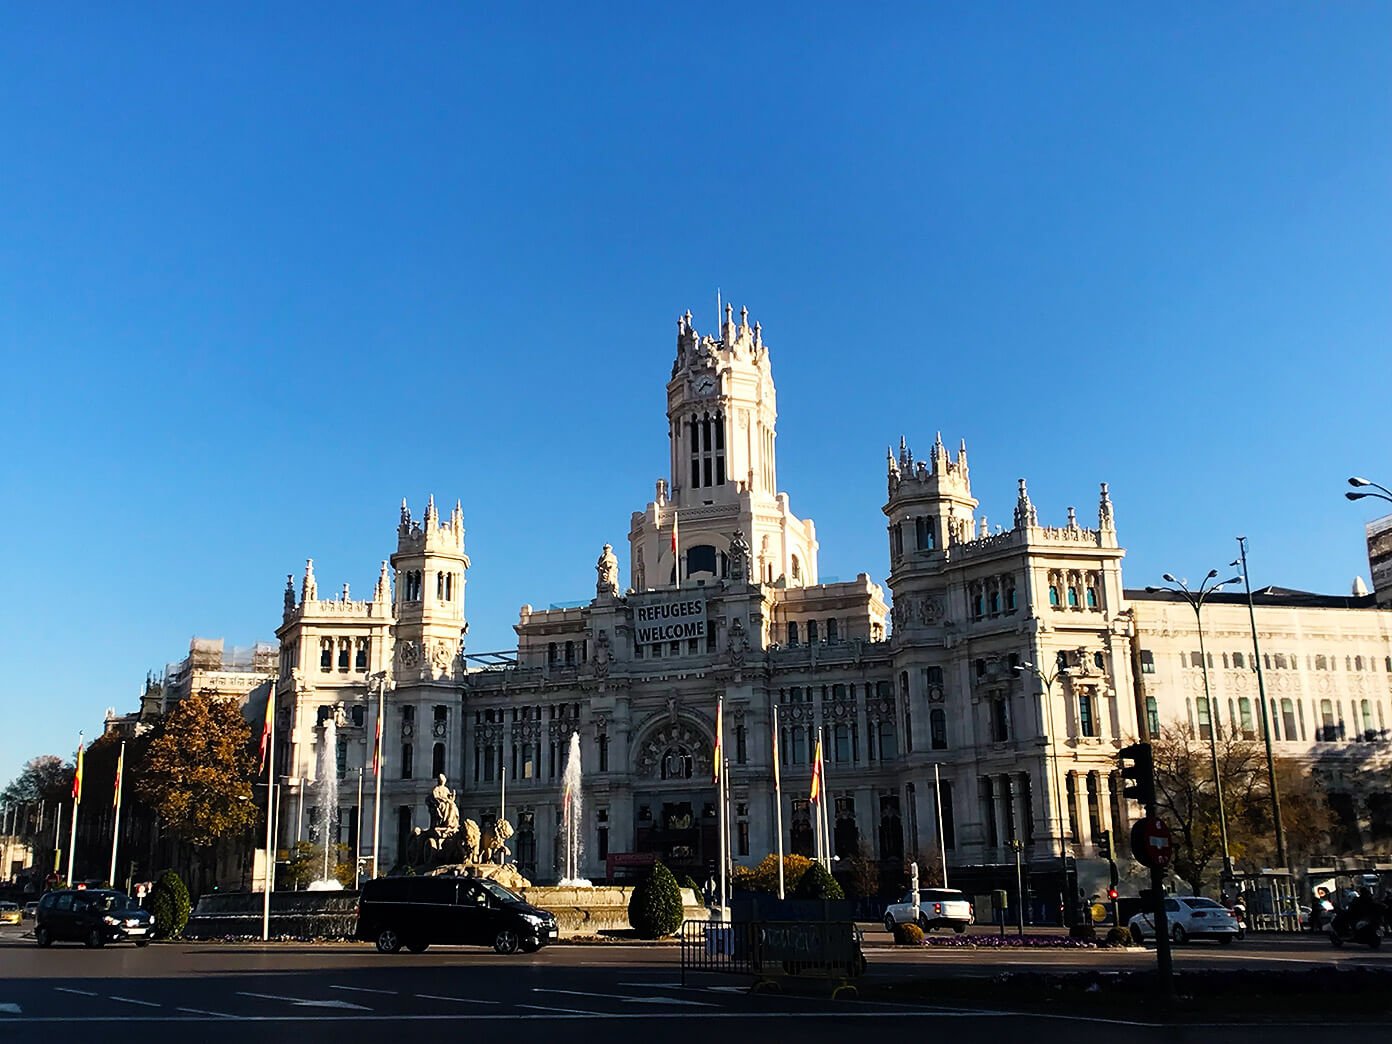 Our Weekend In Madrid | Gimme Some Oven #madrid #spain #travel